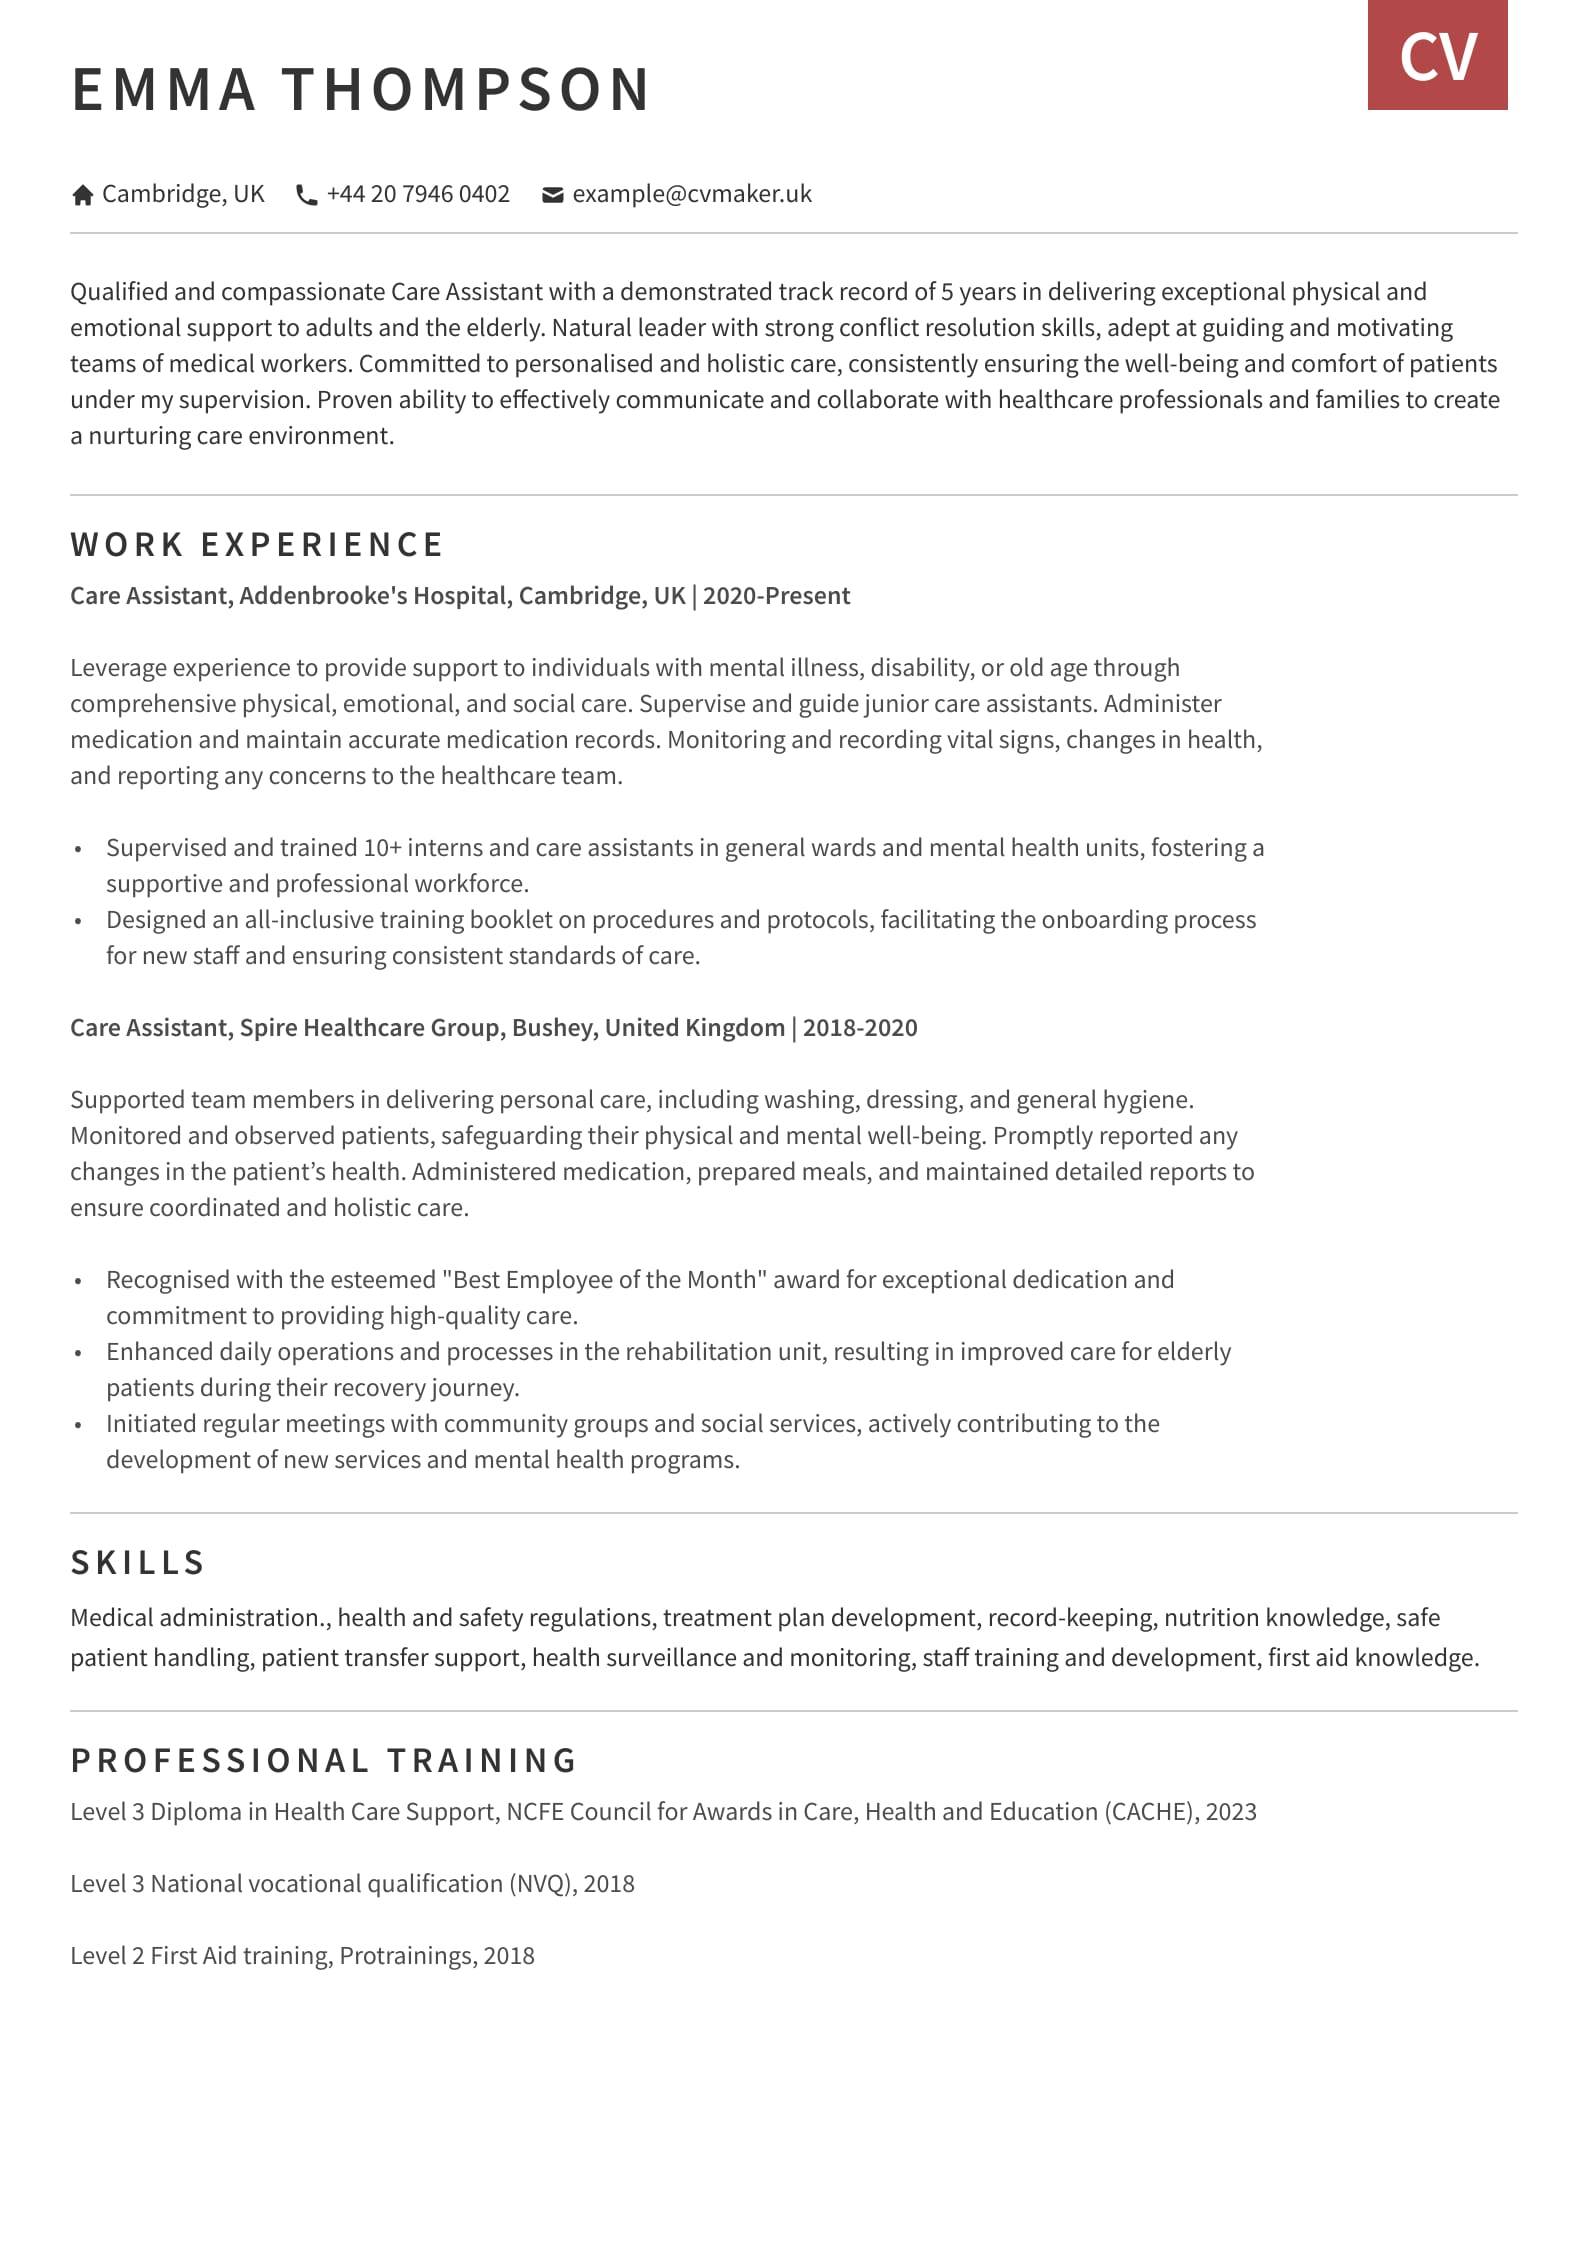 CV example - Care Assistant  - Otago template